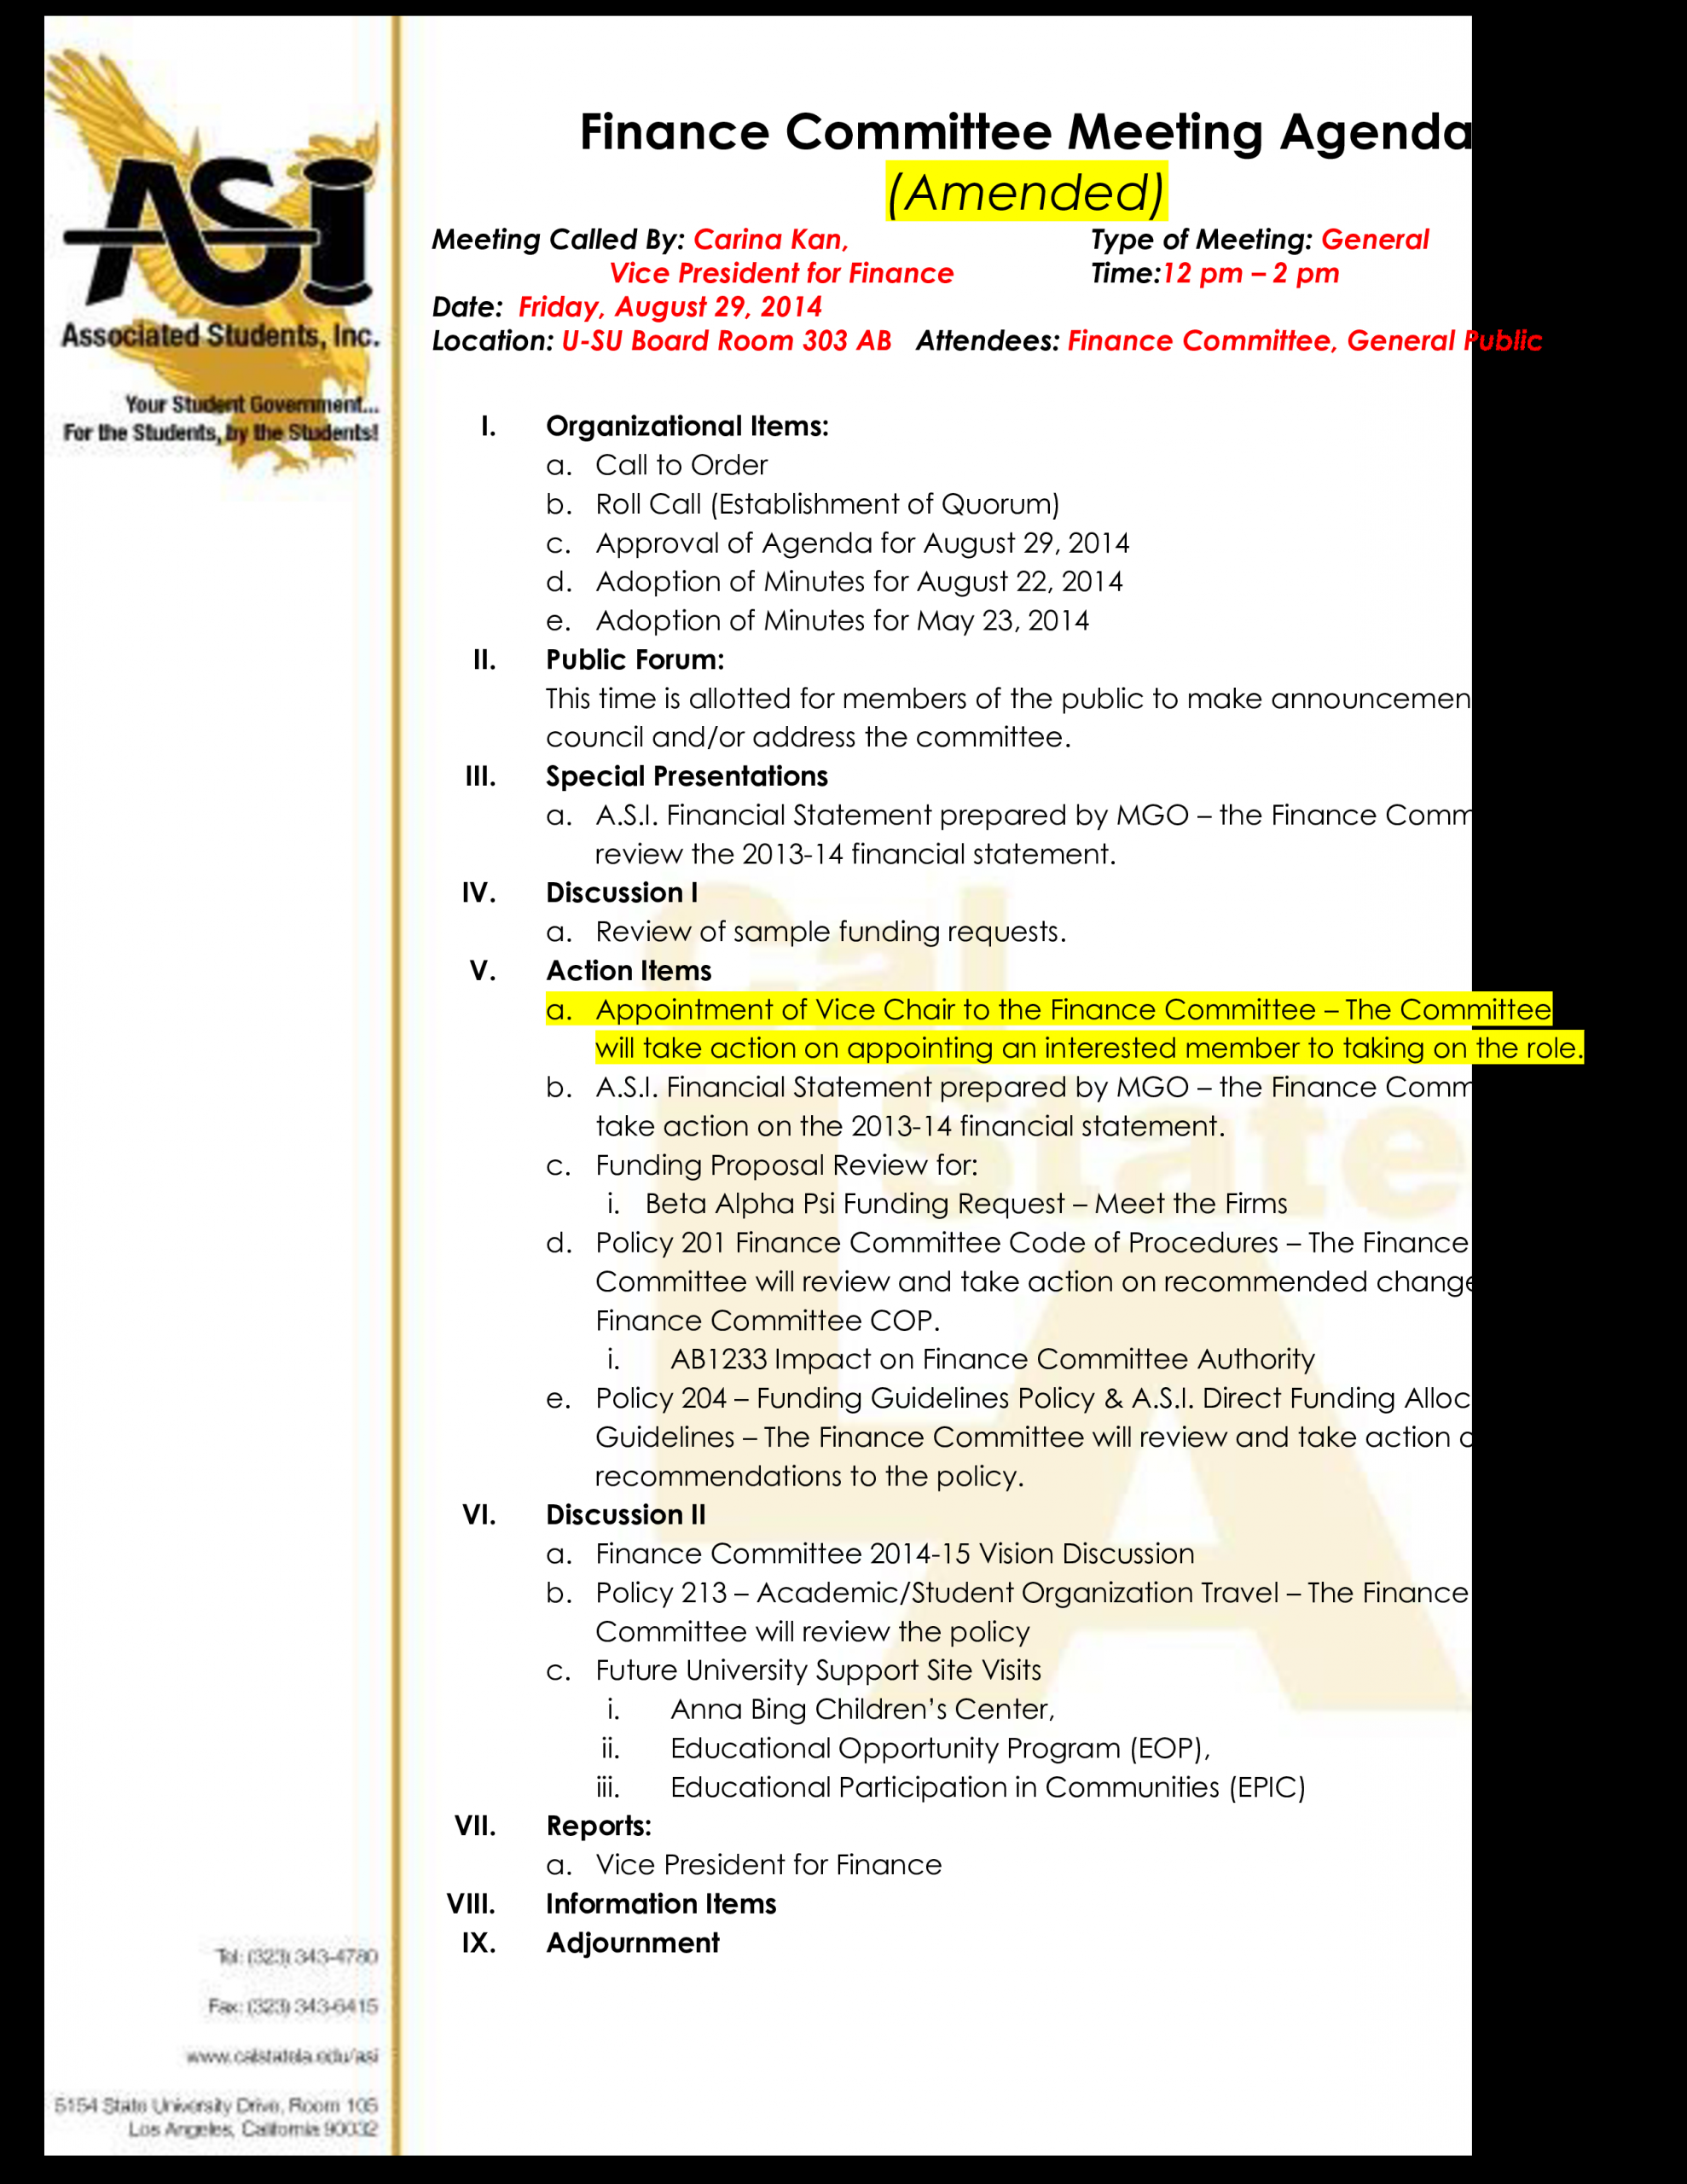 Finance Committee Meeting Agenda Templates At with dimensions 2550 X 3300